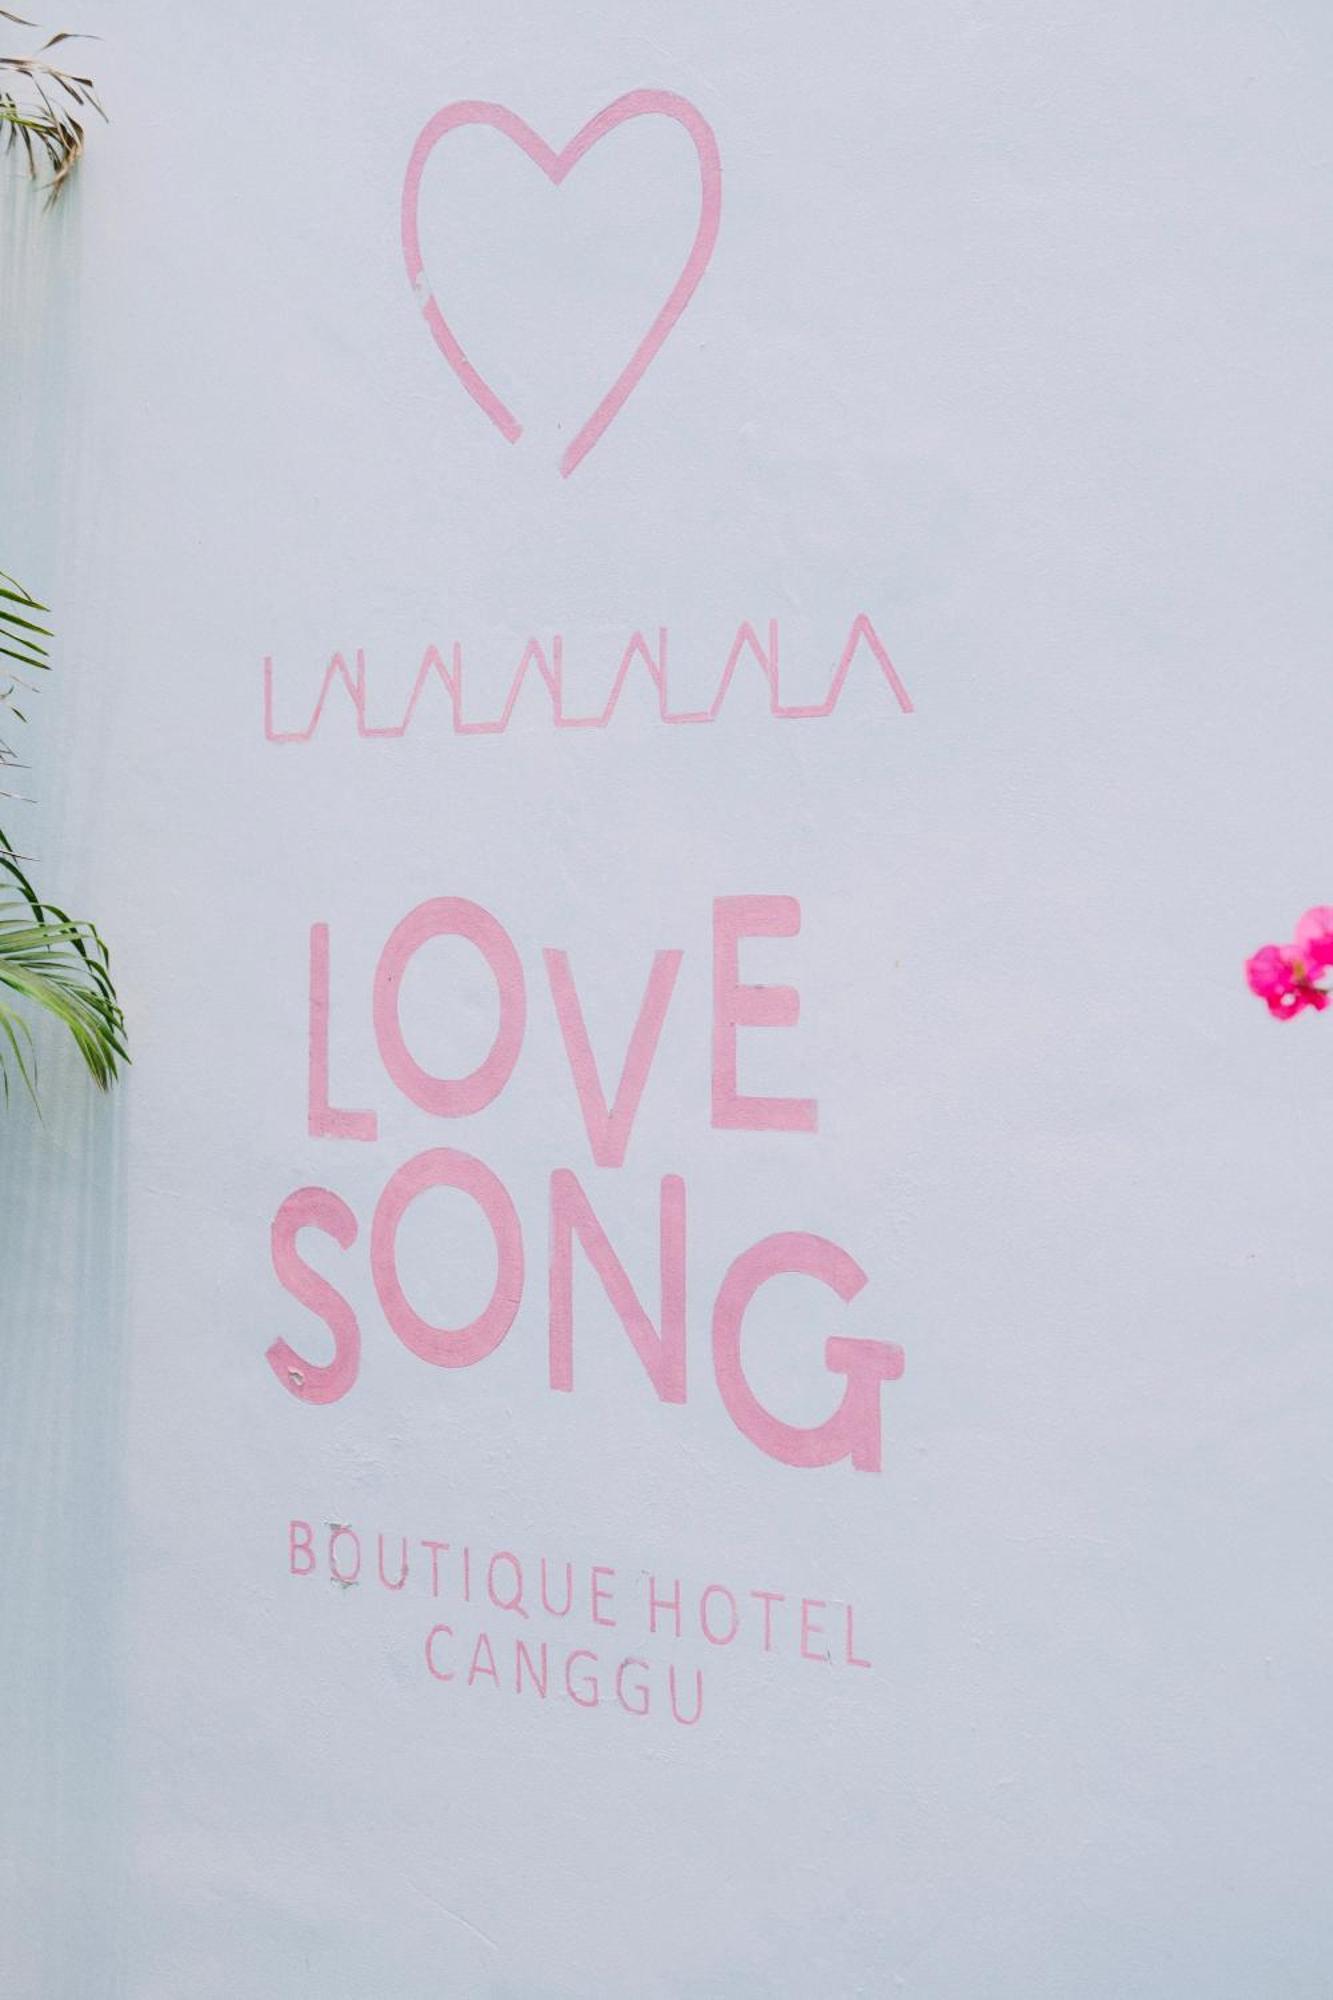 Love Song Boutique Hotel 坎古 外观 照片